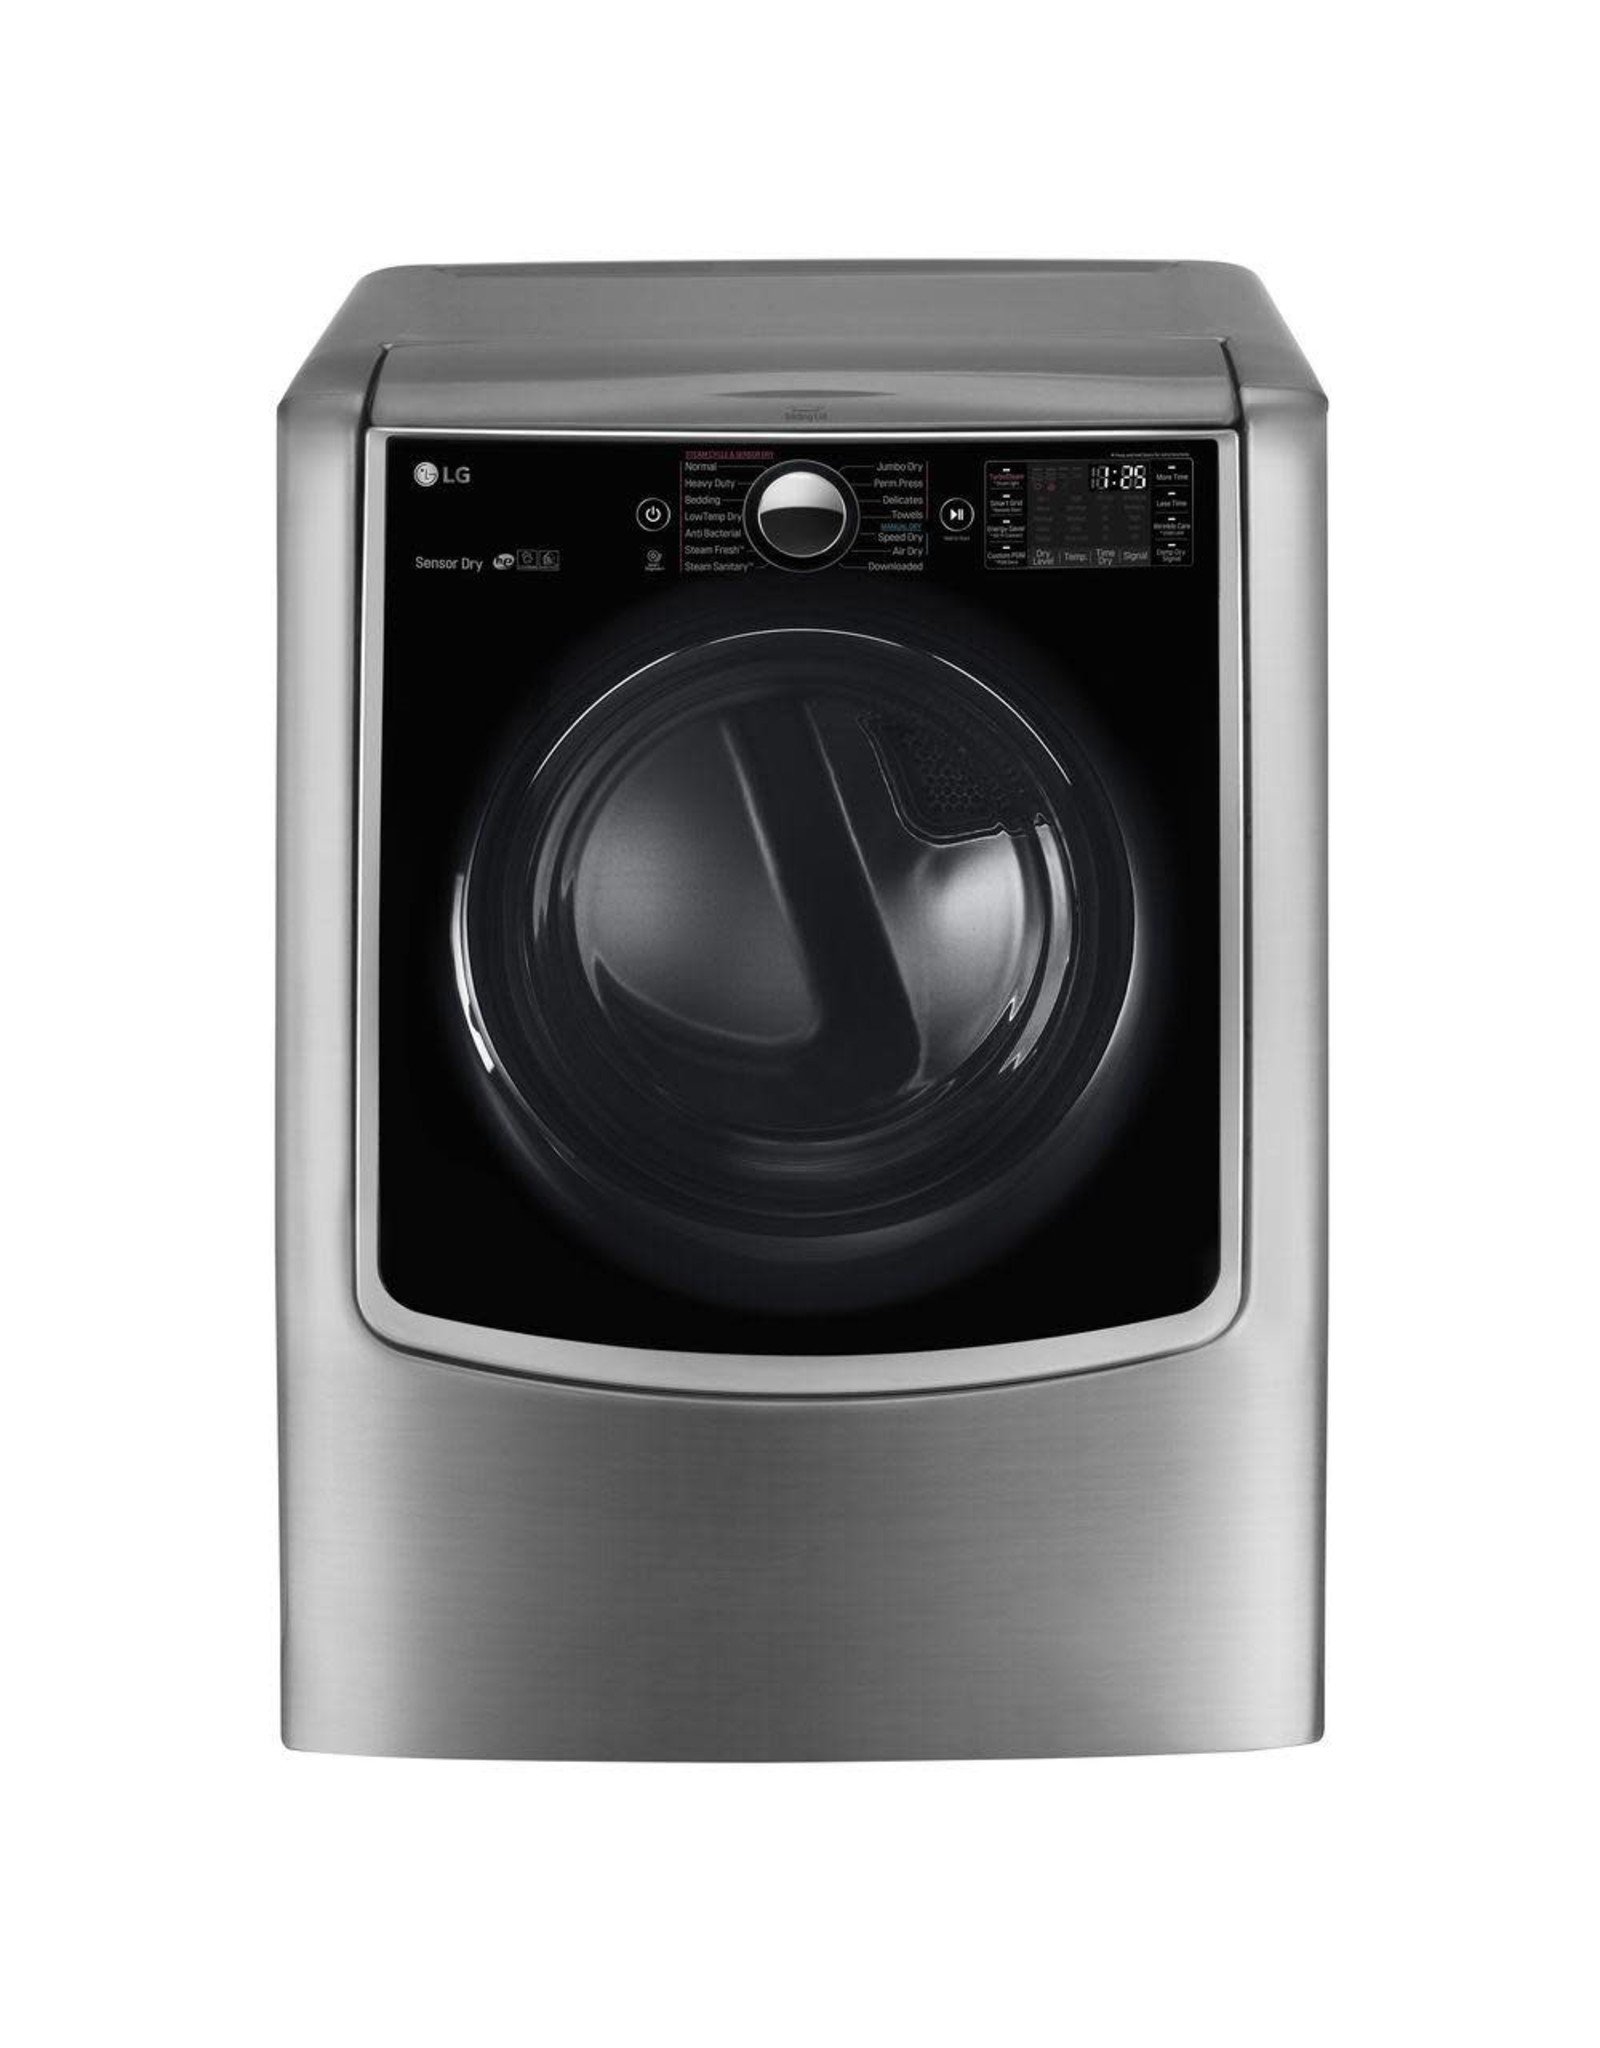 LG Electronics NEW DLEX9000V 9.0 cu. ft. Large Smart Front Load Electric Dryer w/ TurboSteam, Pedestal Compatible & Wi-Fi Enabled in Graphite Steel